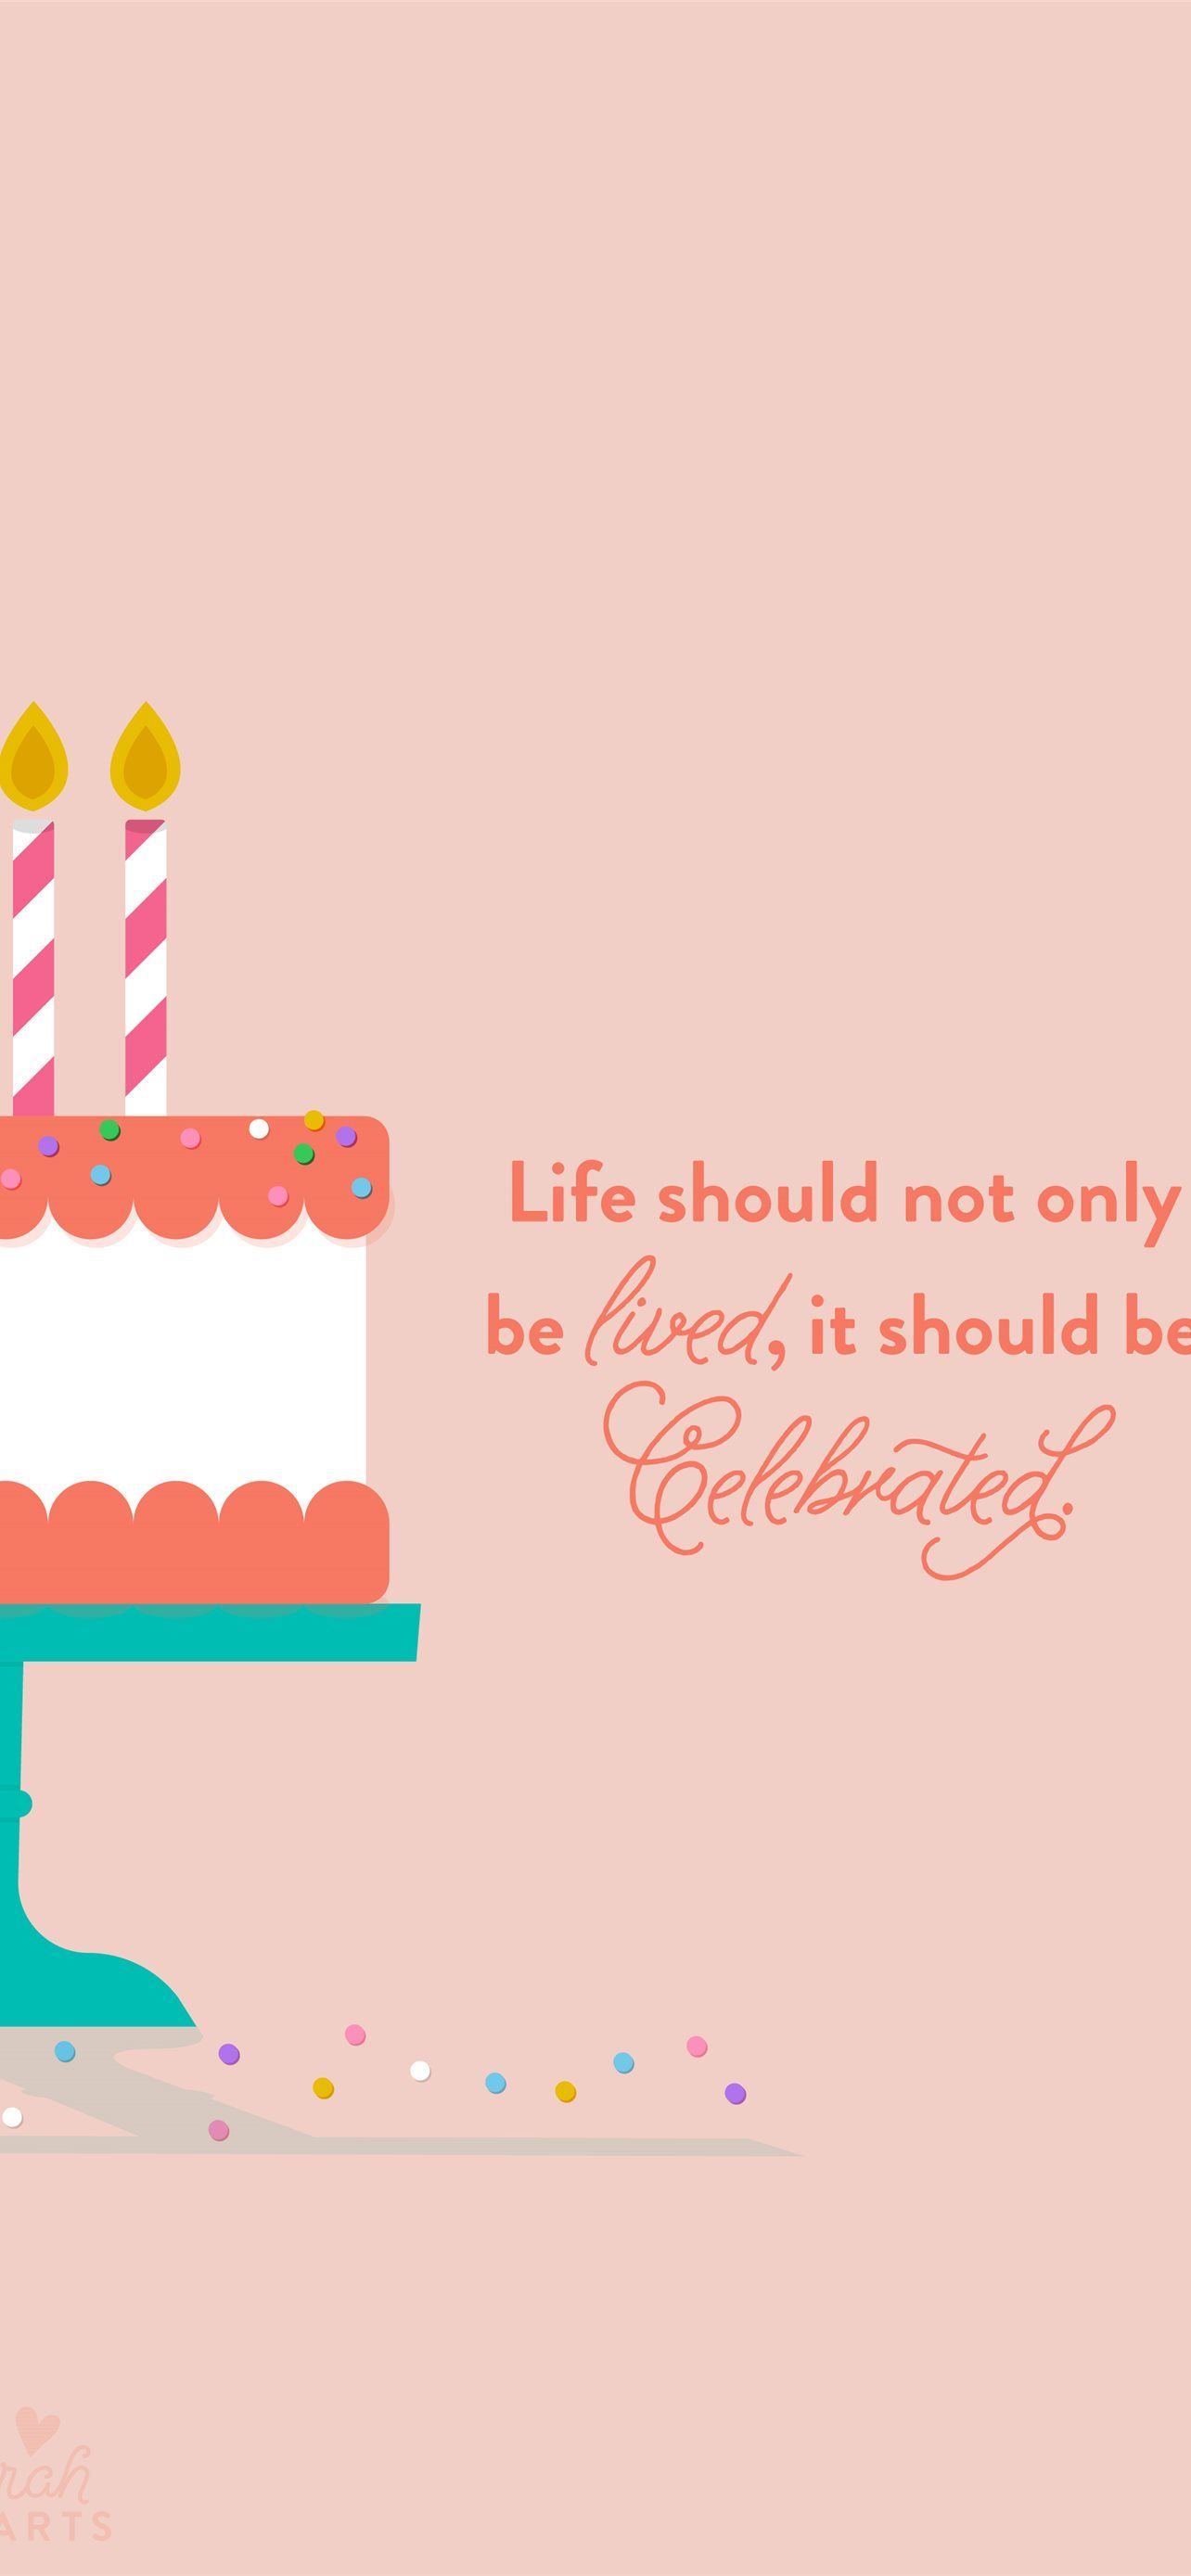 A cake with candles on it and the words life should not only be about love, but also celebrate - Birthday